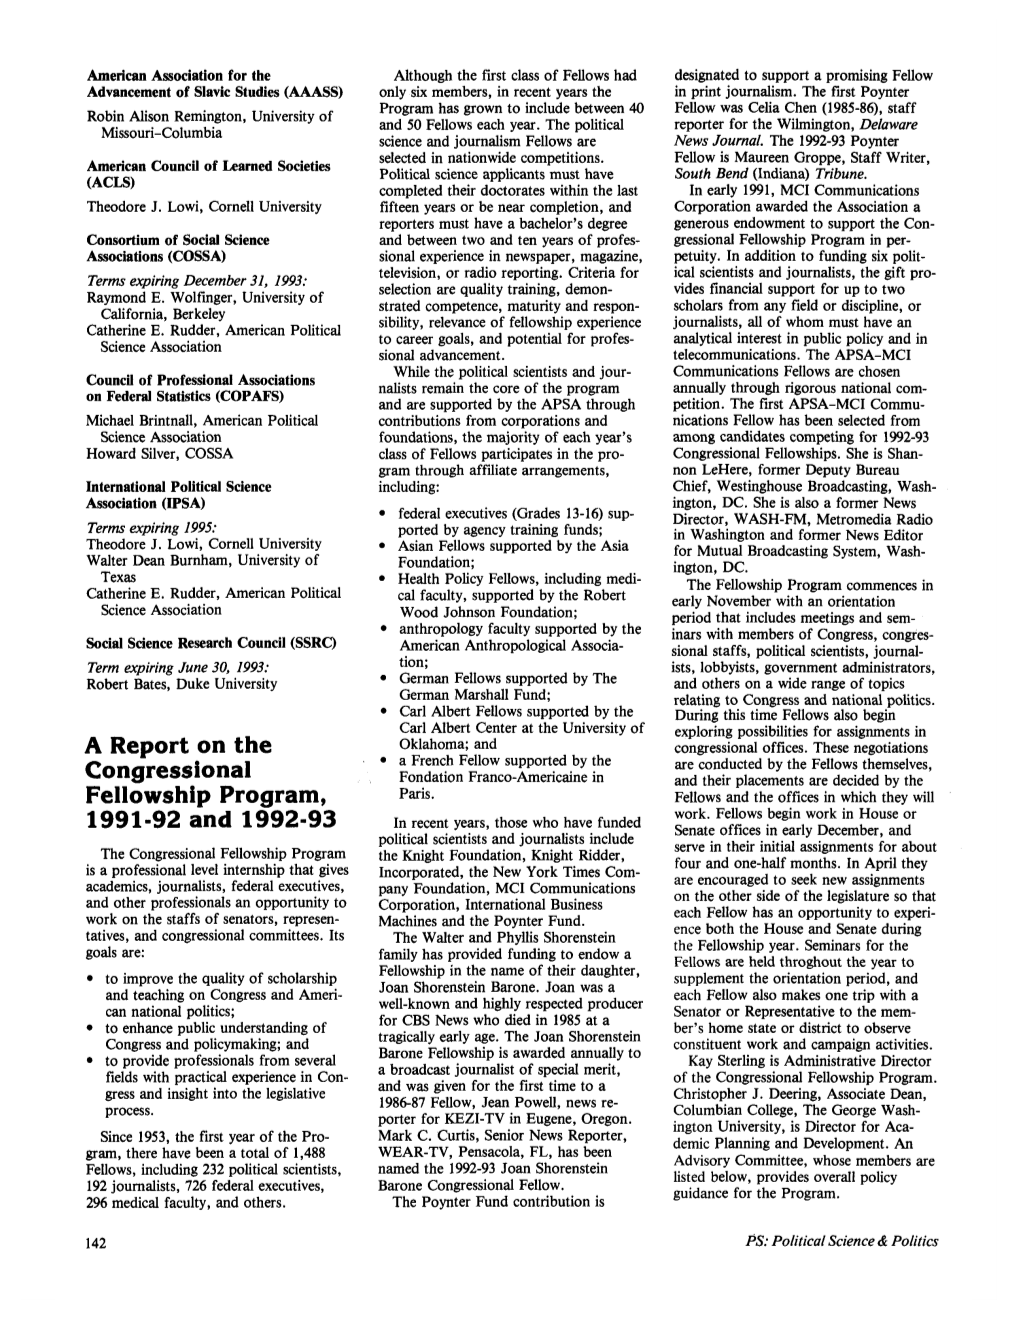 A Report on the Congressional Fellowship Program, 1991-92 and 1992-93